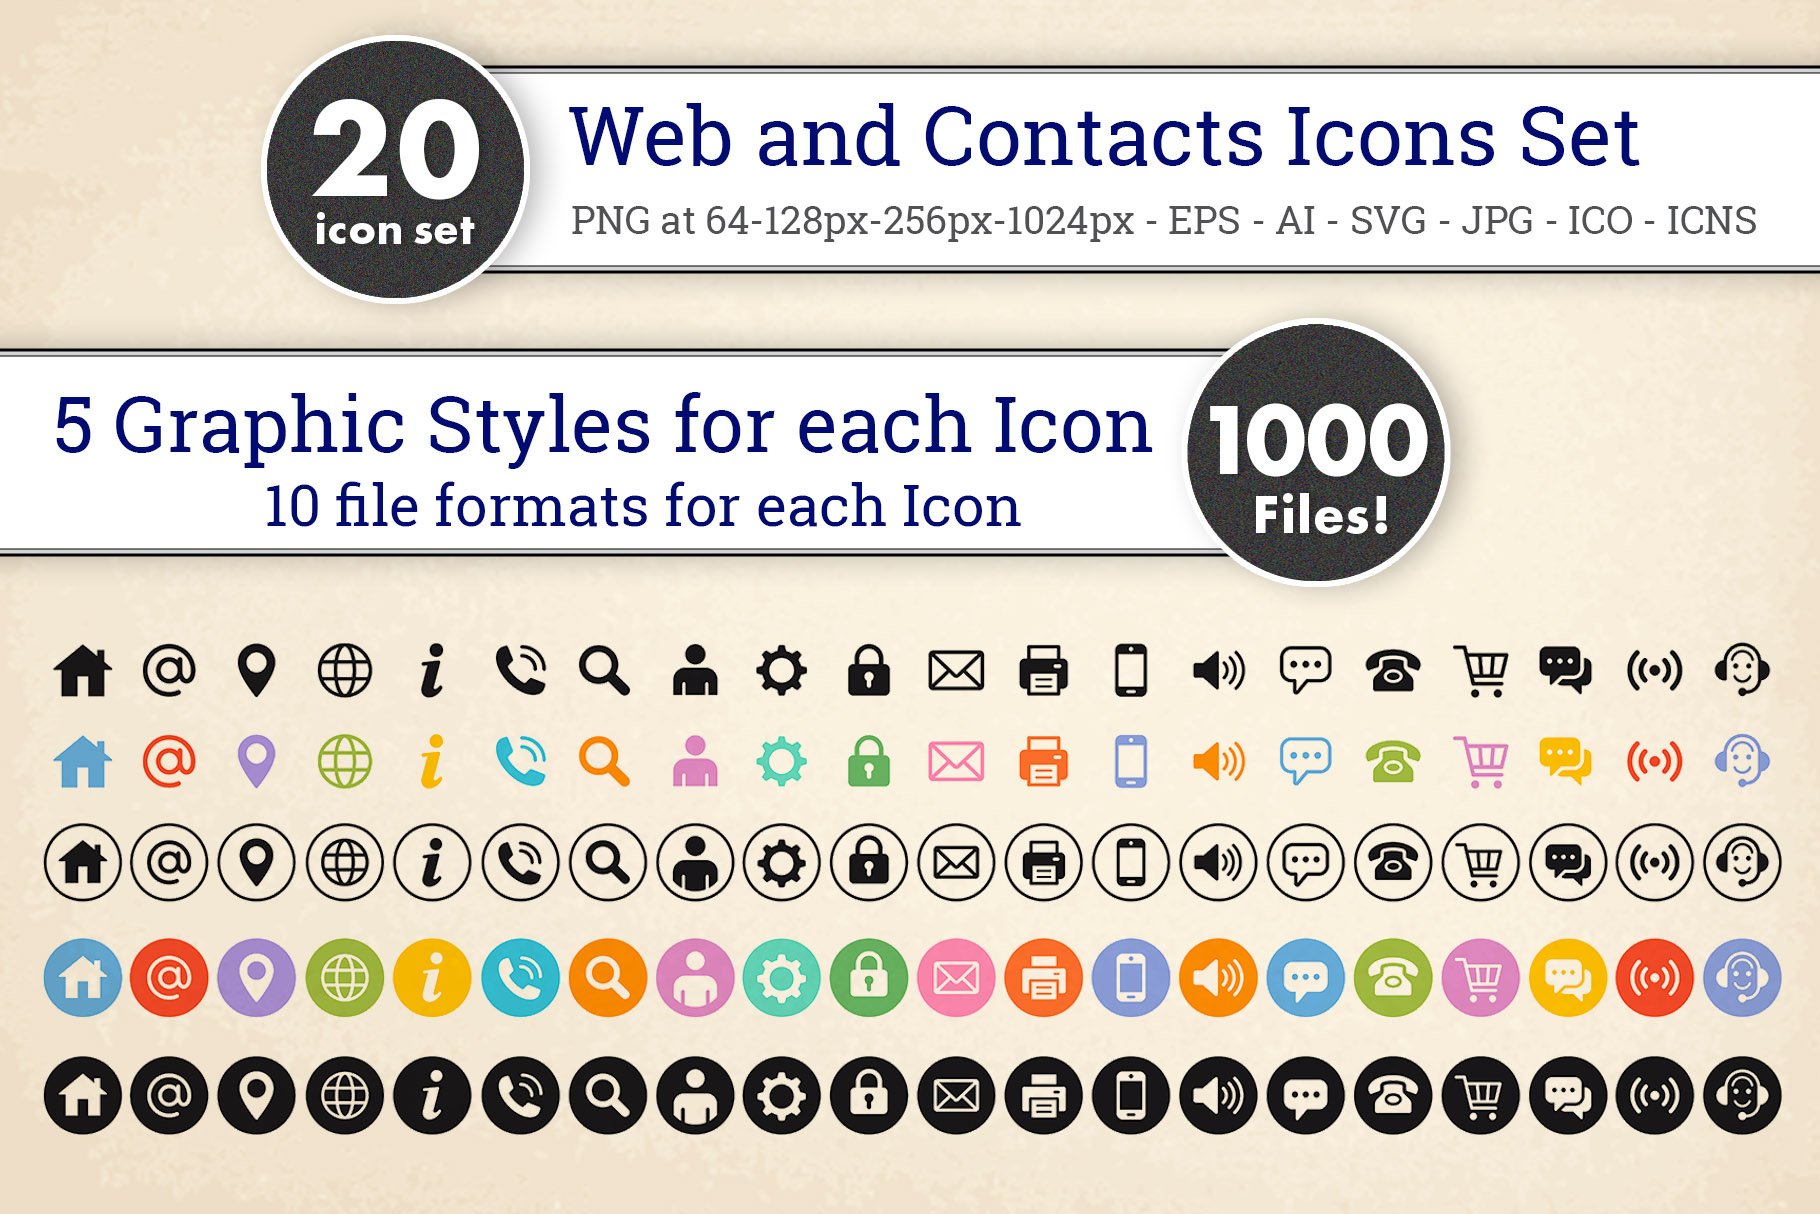 Web and Contacts Vector icons set preview image.